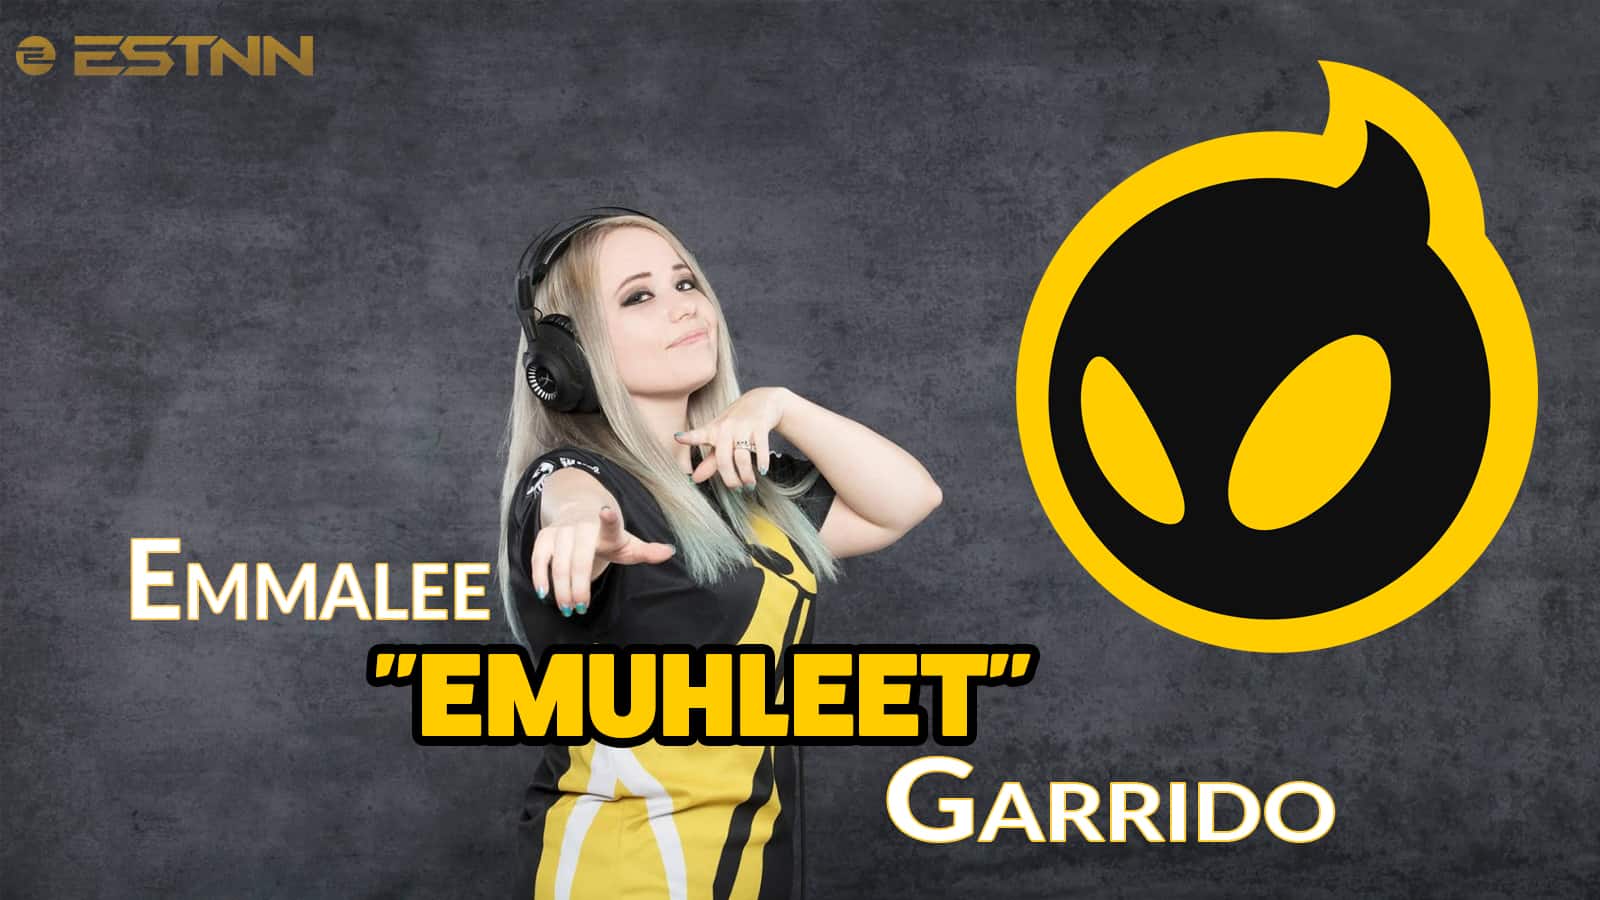 How To Be A Nurse And A Female Pro Gamer At The Same Time – An Interview With Emmalee “EMUHLEET” Garrido.